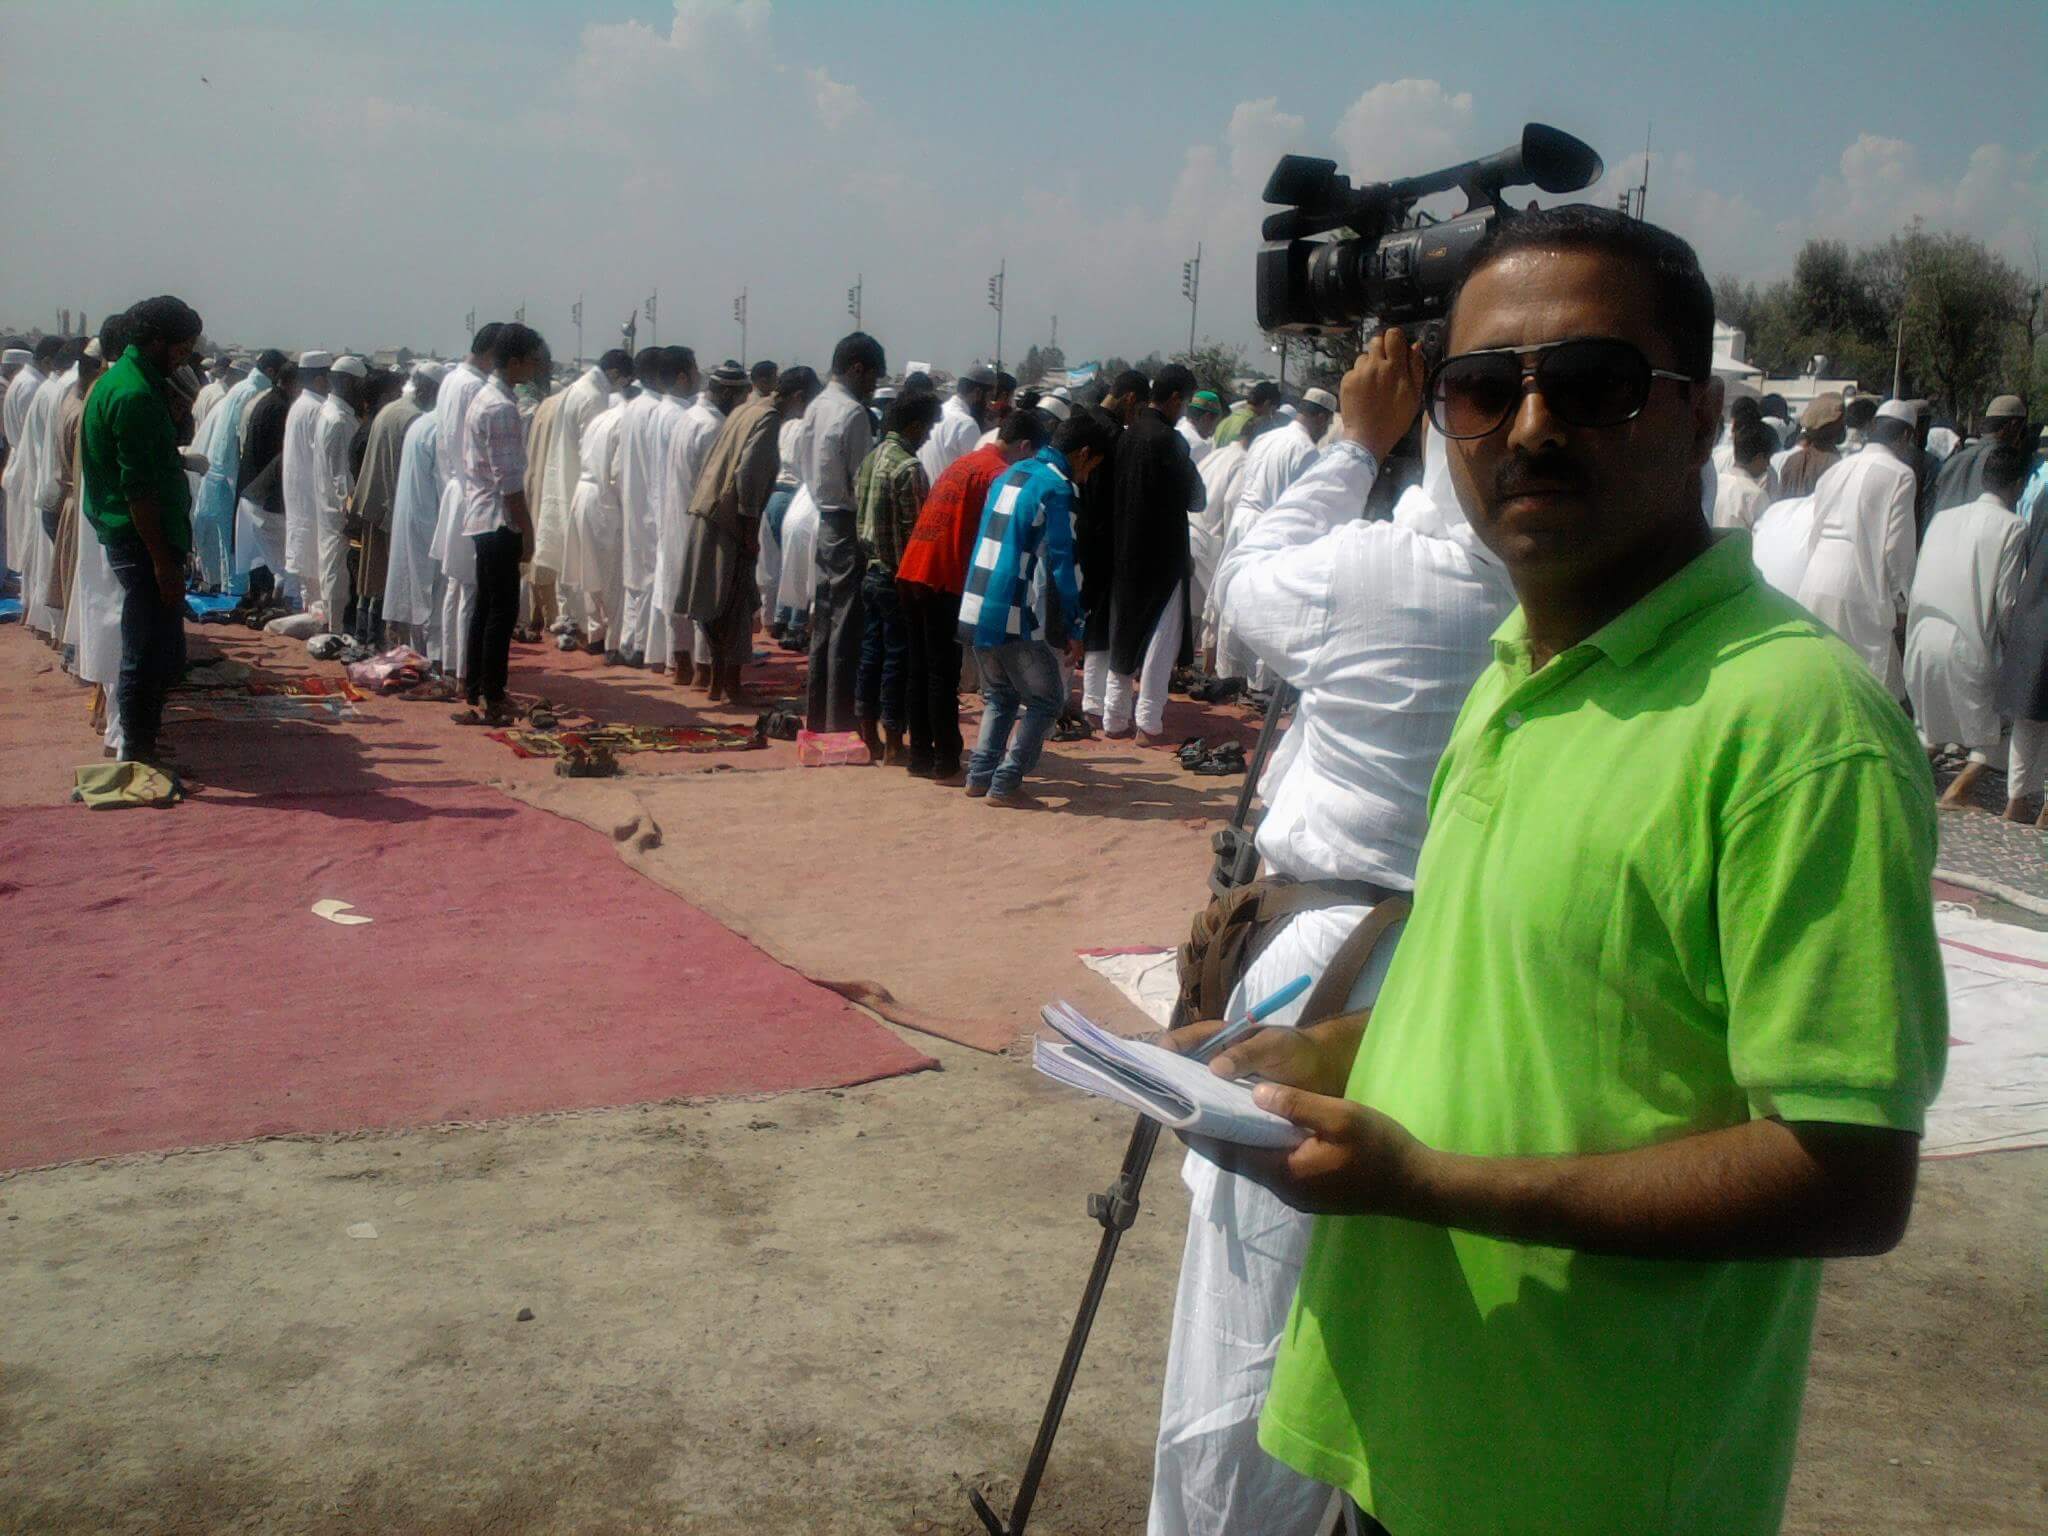 Still from I Never Left. A man in dark glasses and a bright green shirt is looking directly at the camera. Behind him, a person is filming with a large camera on his shoulder a group of people standing in lines in front of prayer mats.